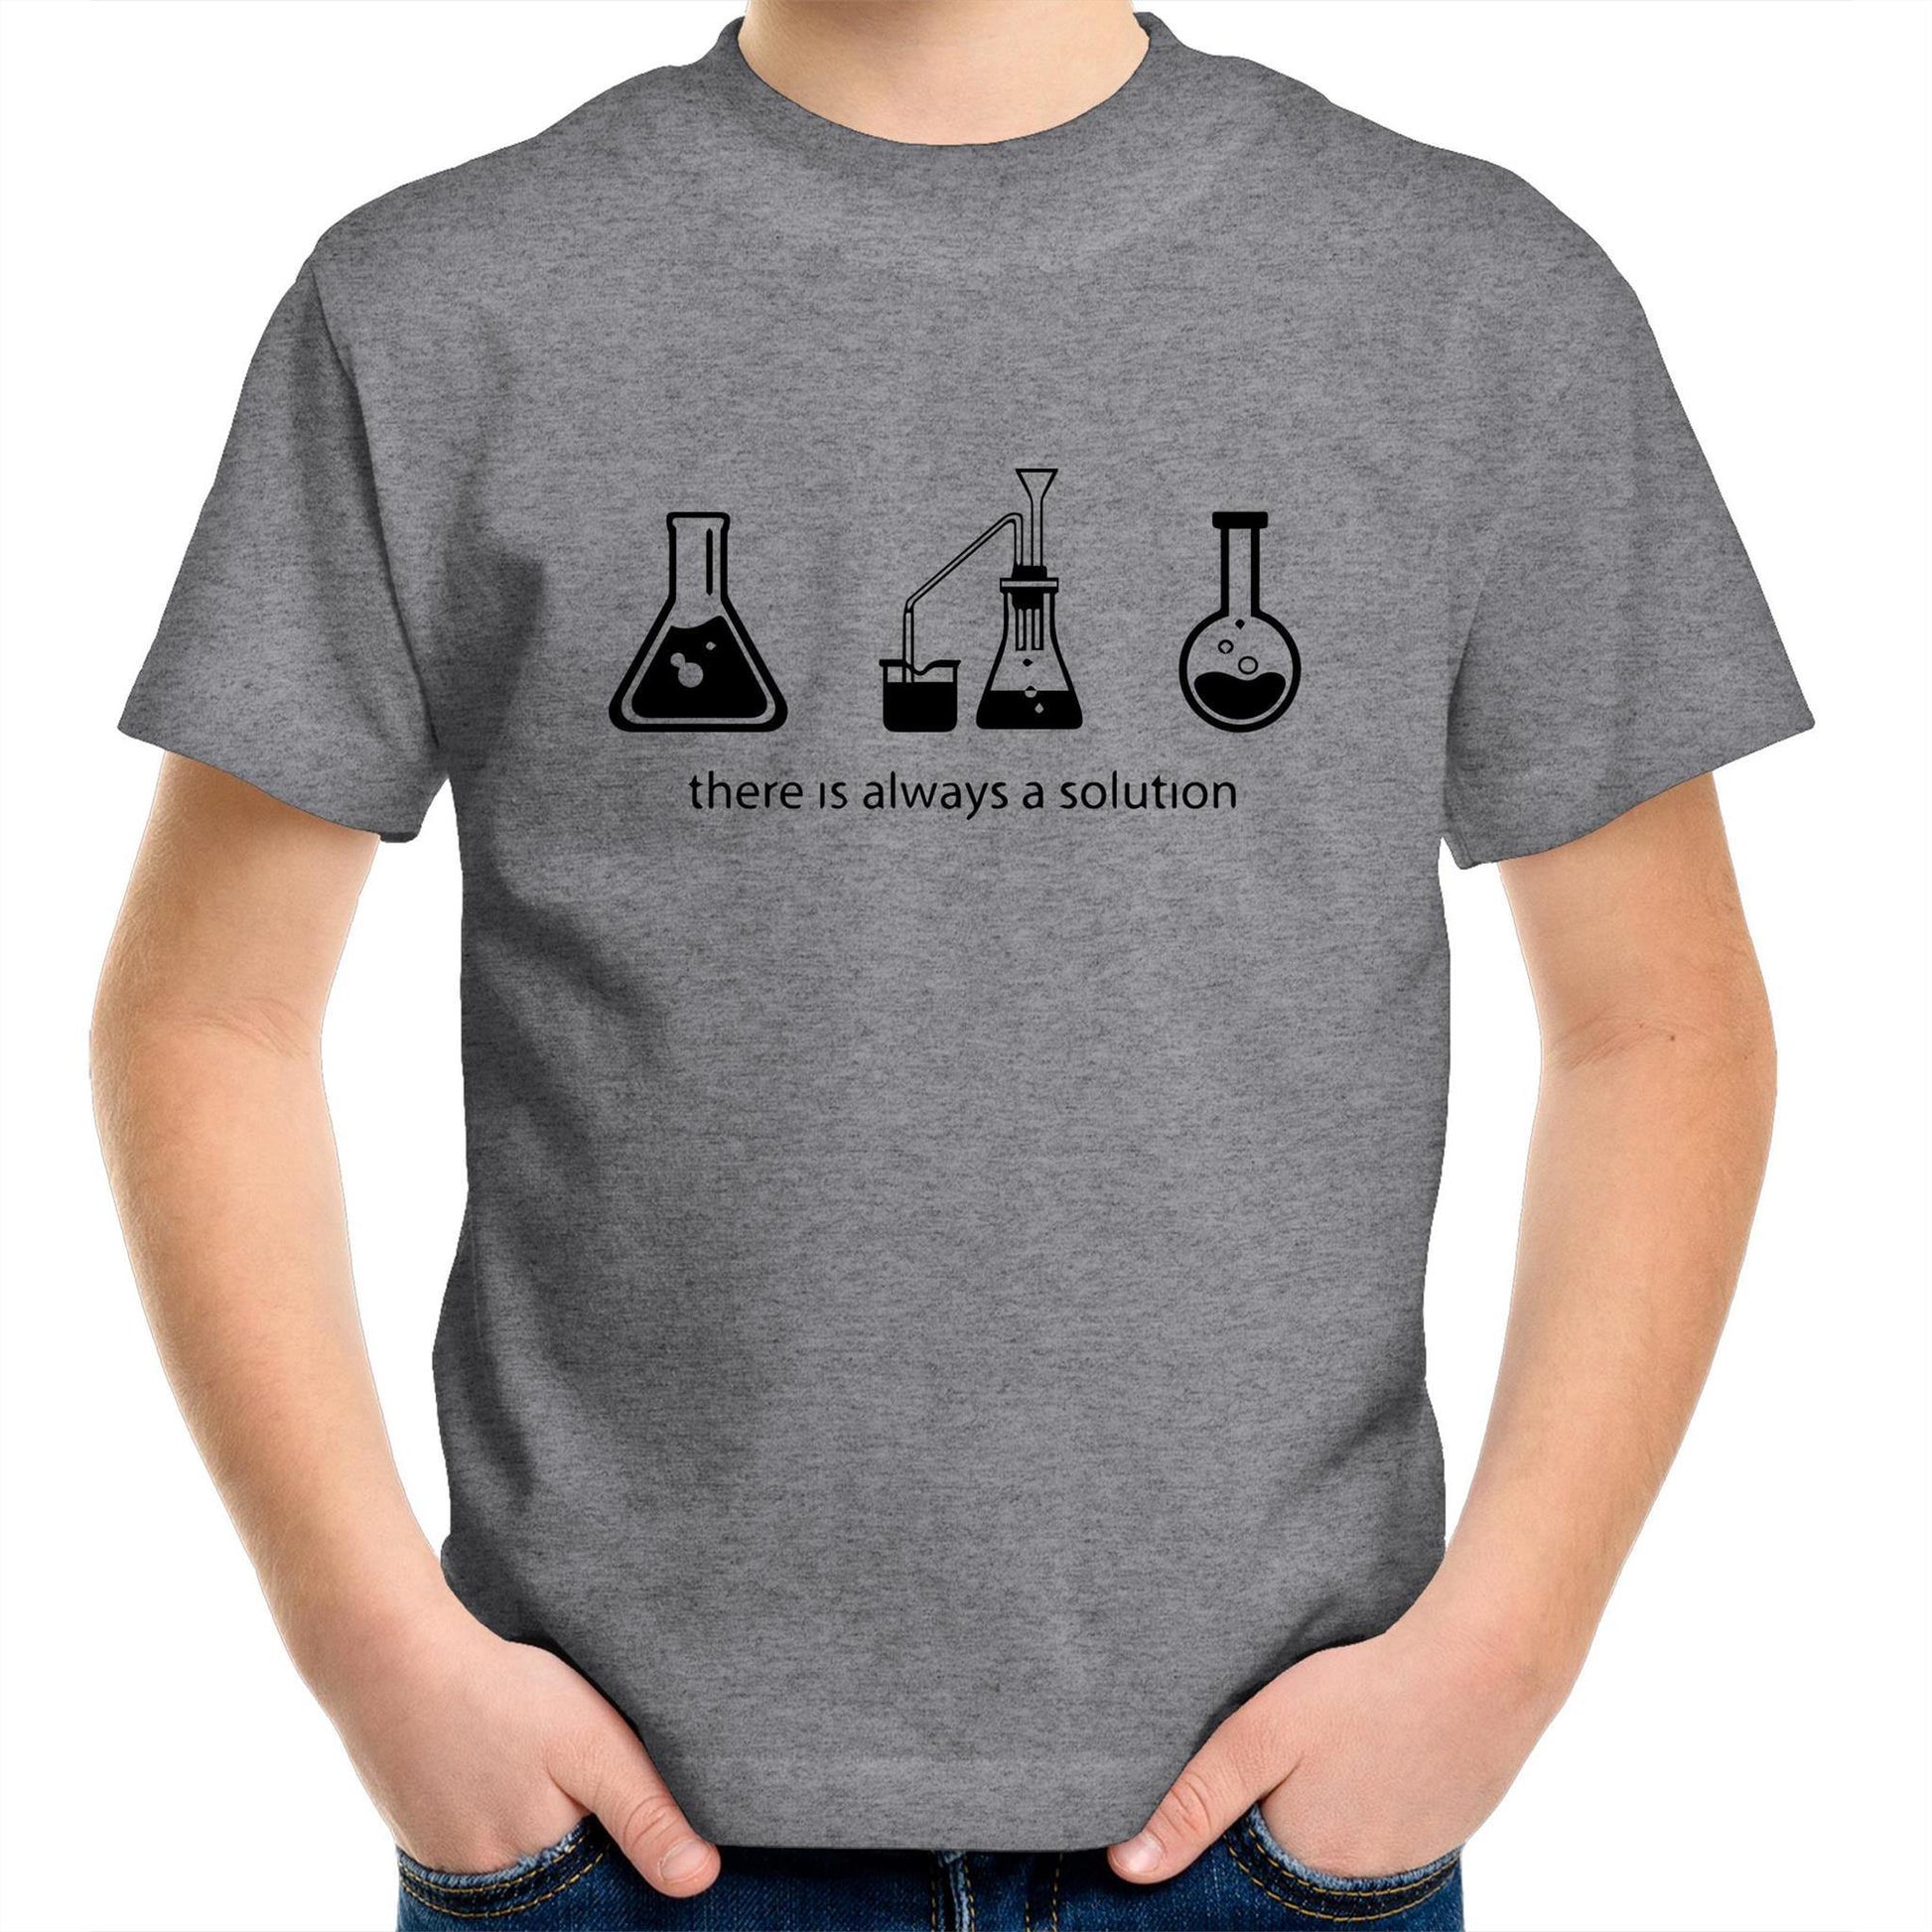 There Is Always A Solution - Kids Youth Crew T-Shirt Grey Marle Kids Youth T-shirt Science